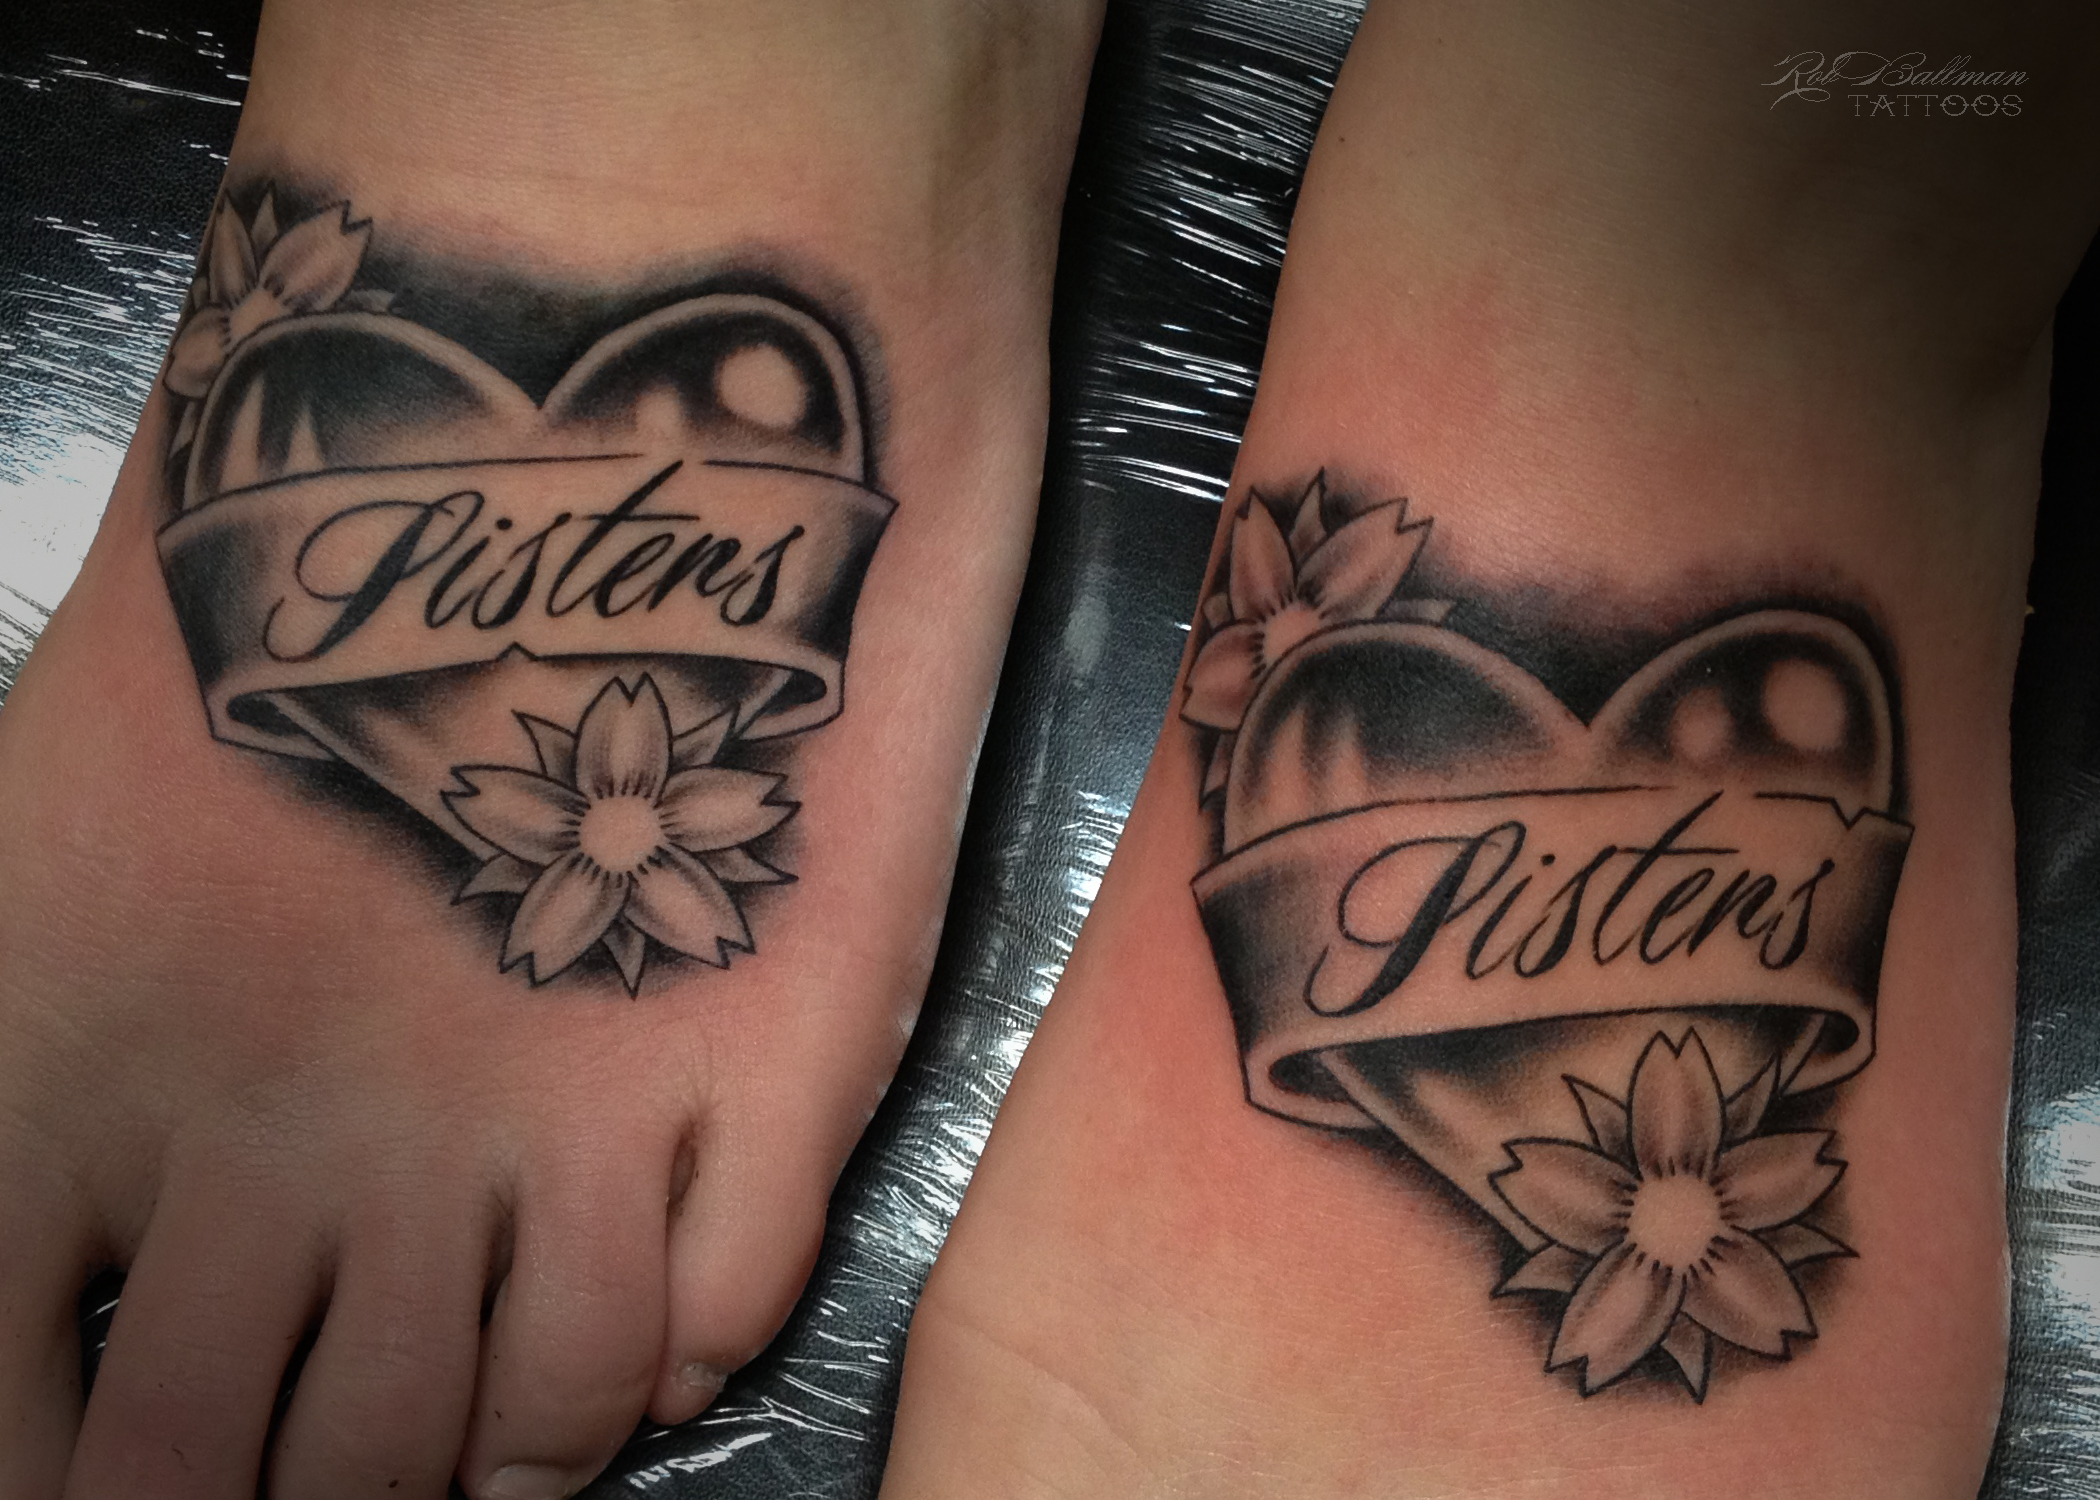 2. "Sisters Forever" Tattoo Designs - wide 1